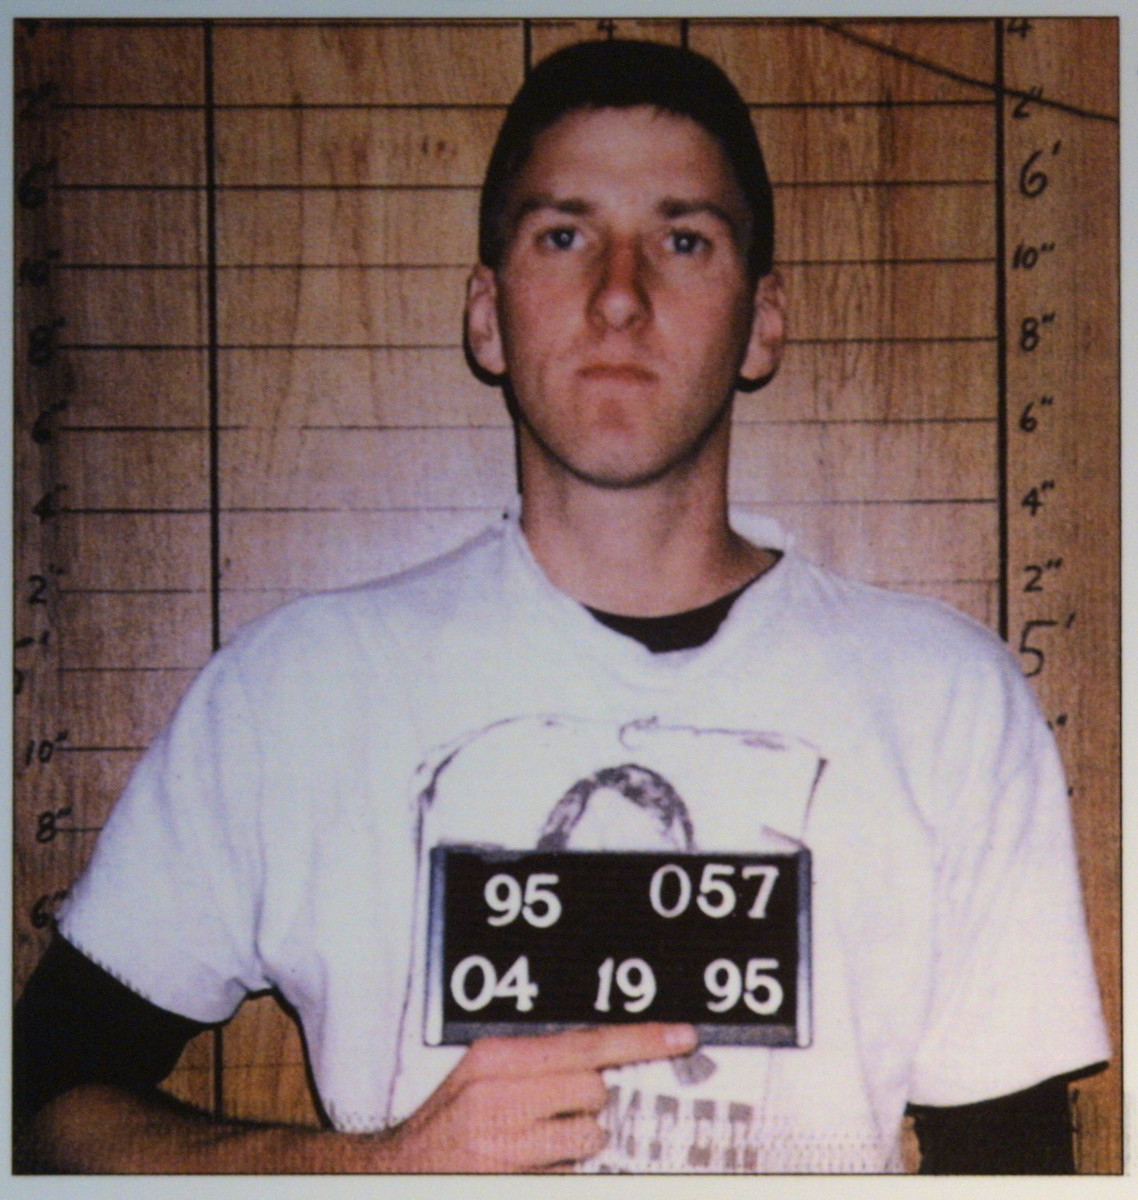 A mugshot of Timothy McVeigh, the perpetrator of the Oklahoma City bombing.